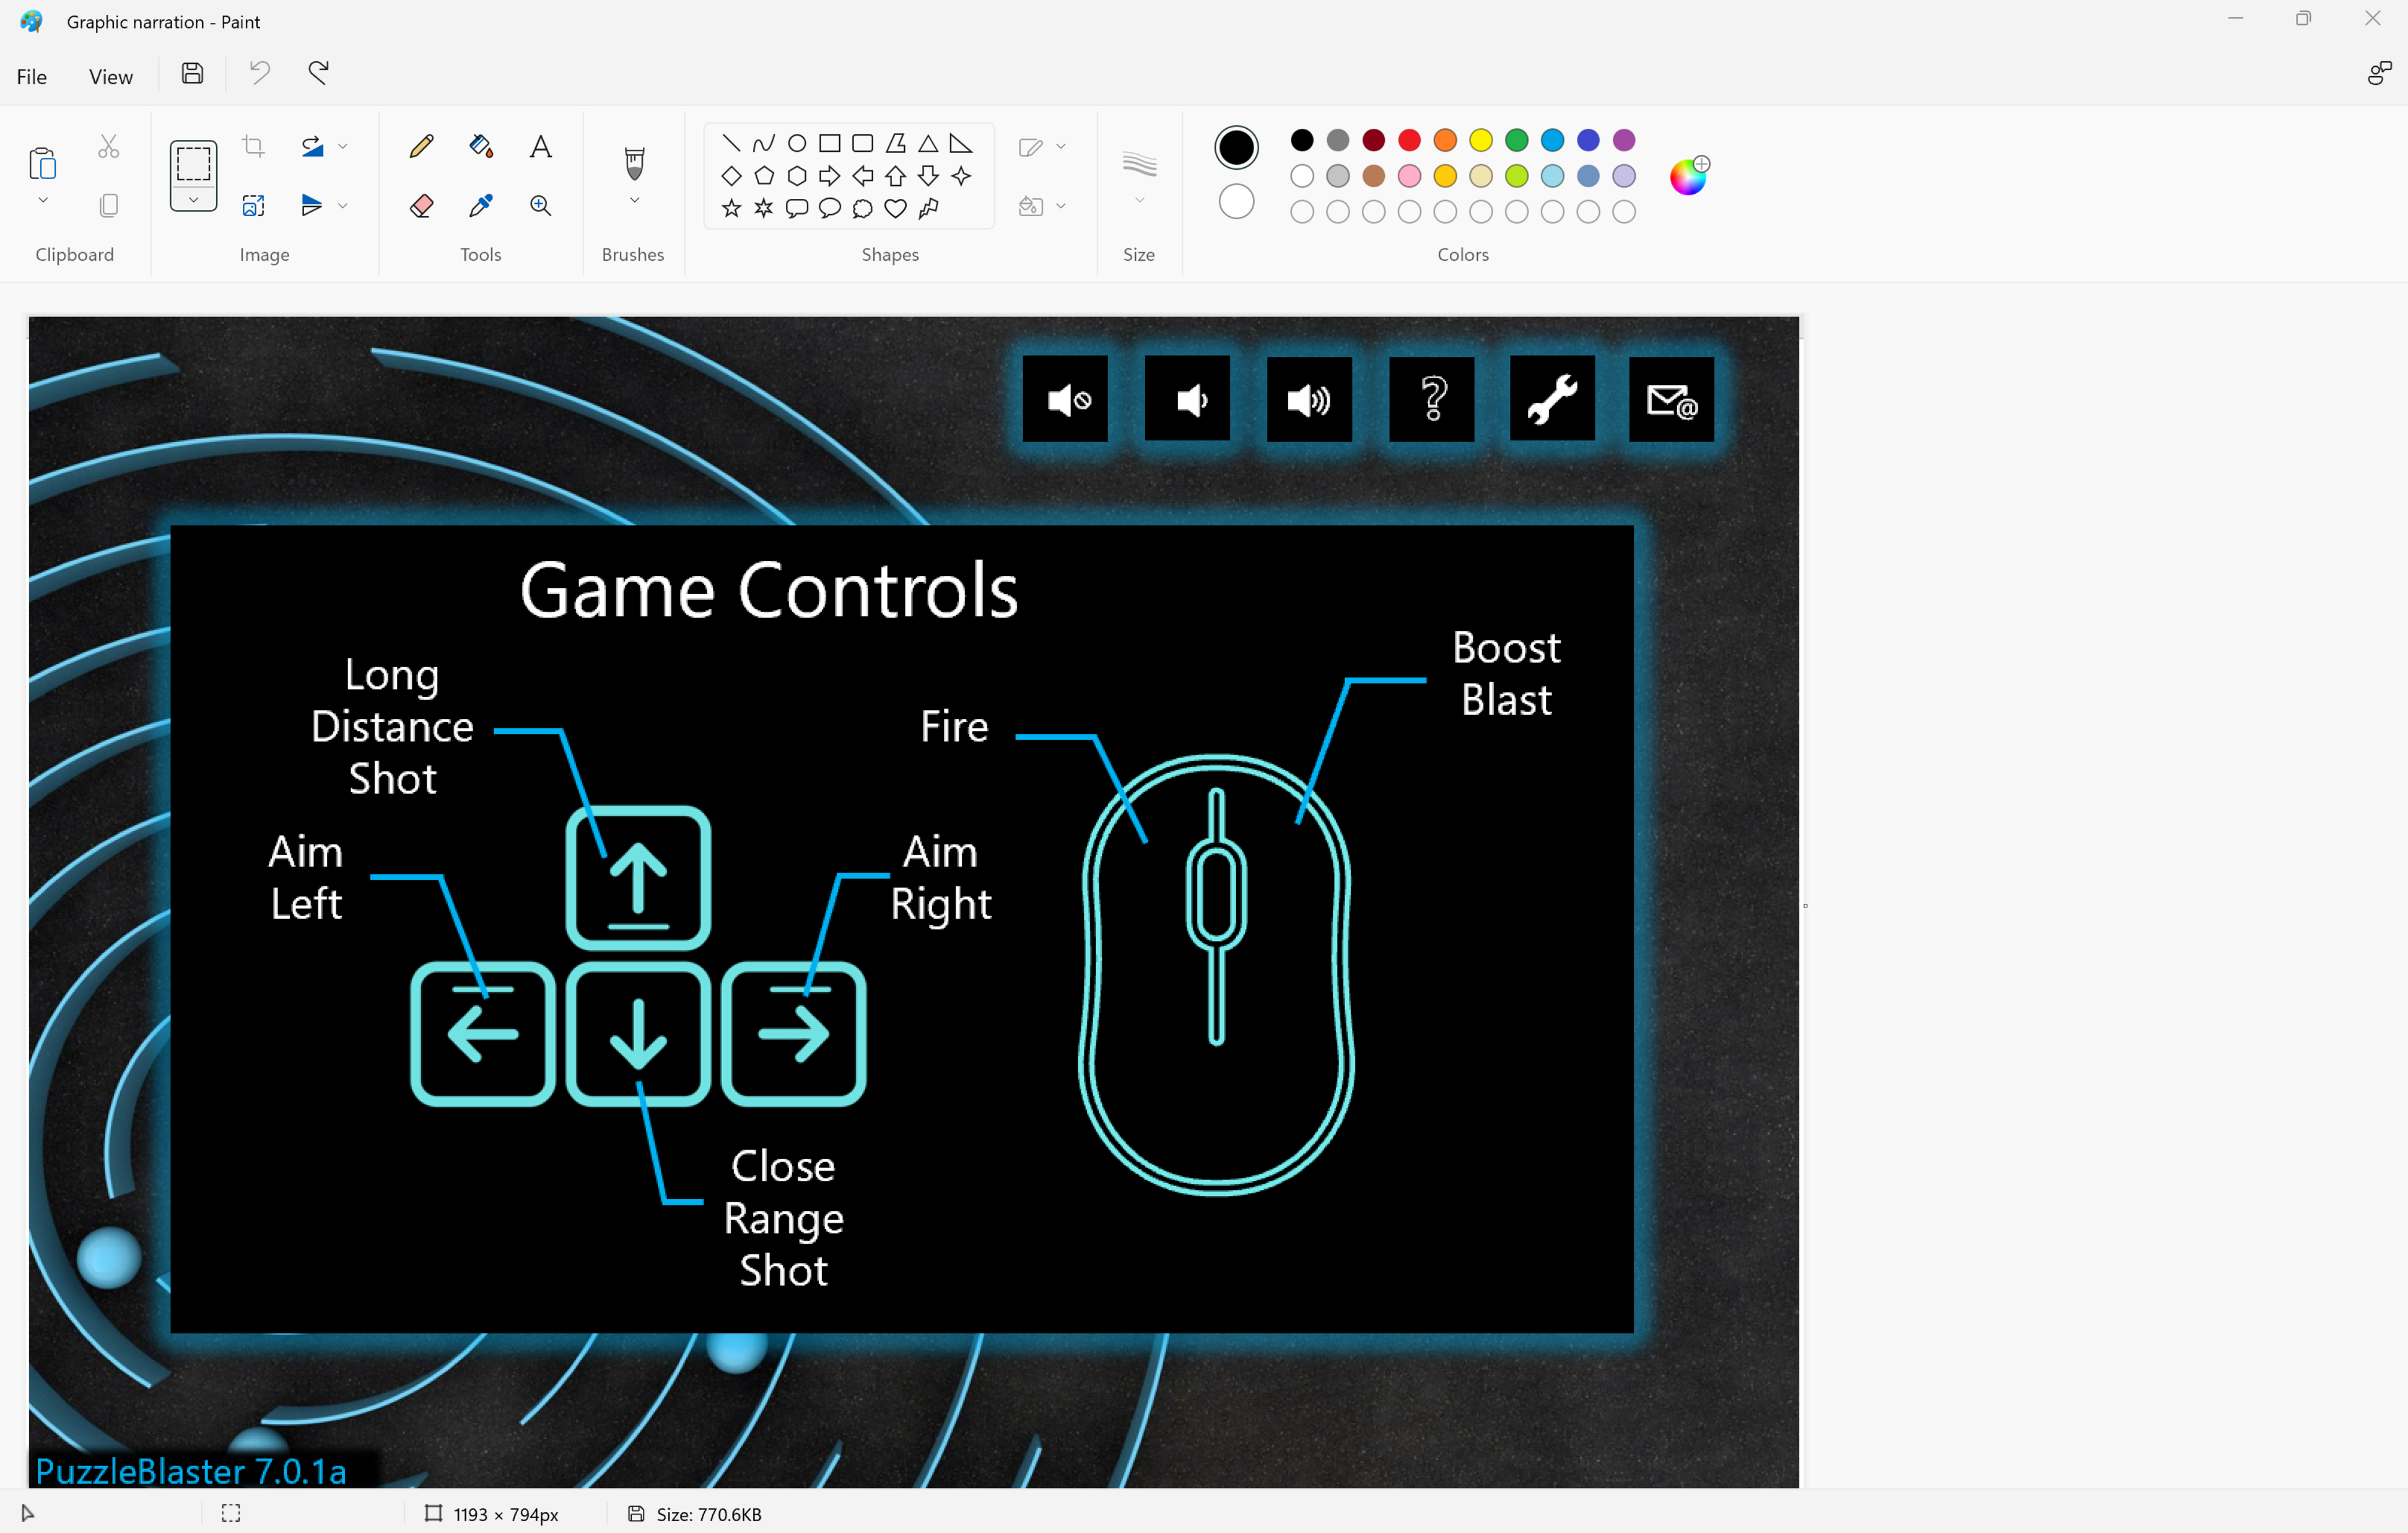 Screenshot of Windows Paint app with image of a game controls menu UI from a puzzle game pasted into the paint app. 